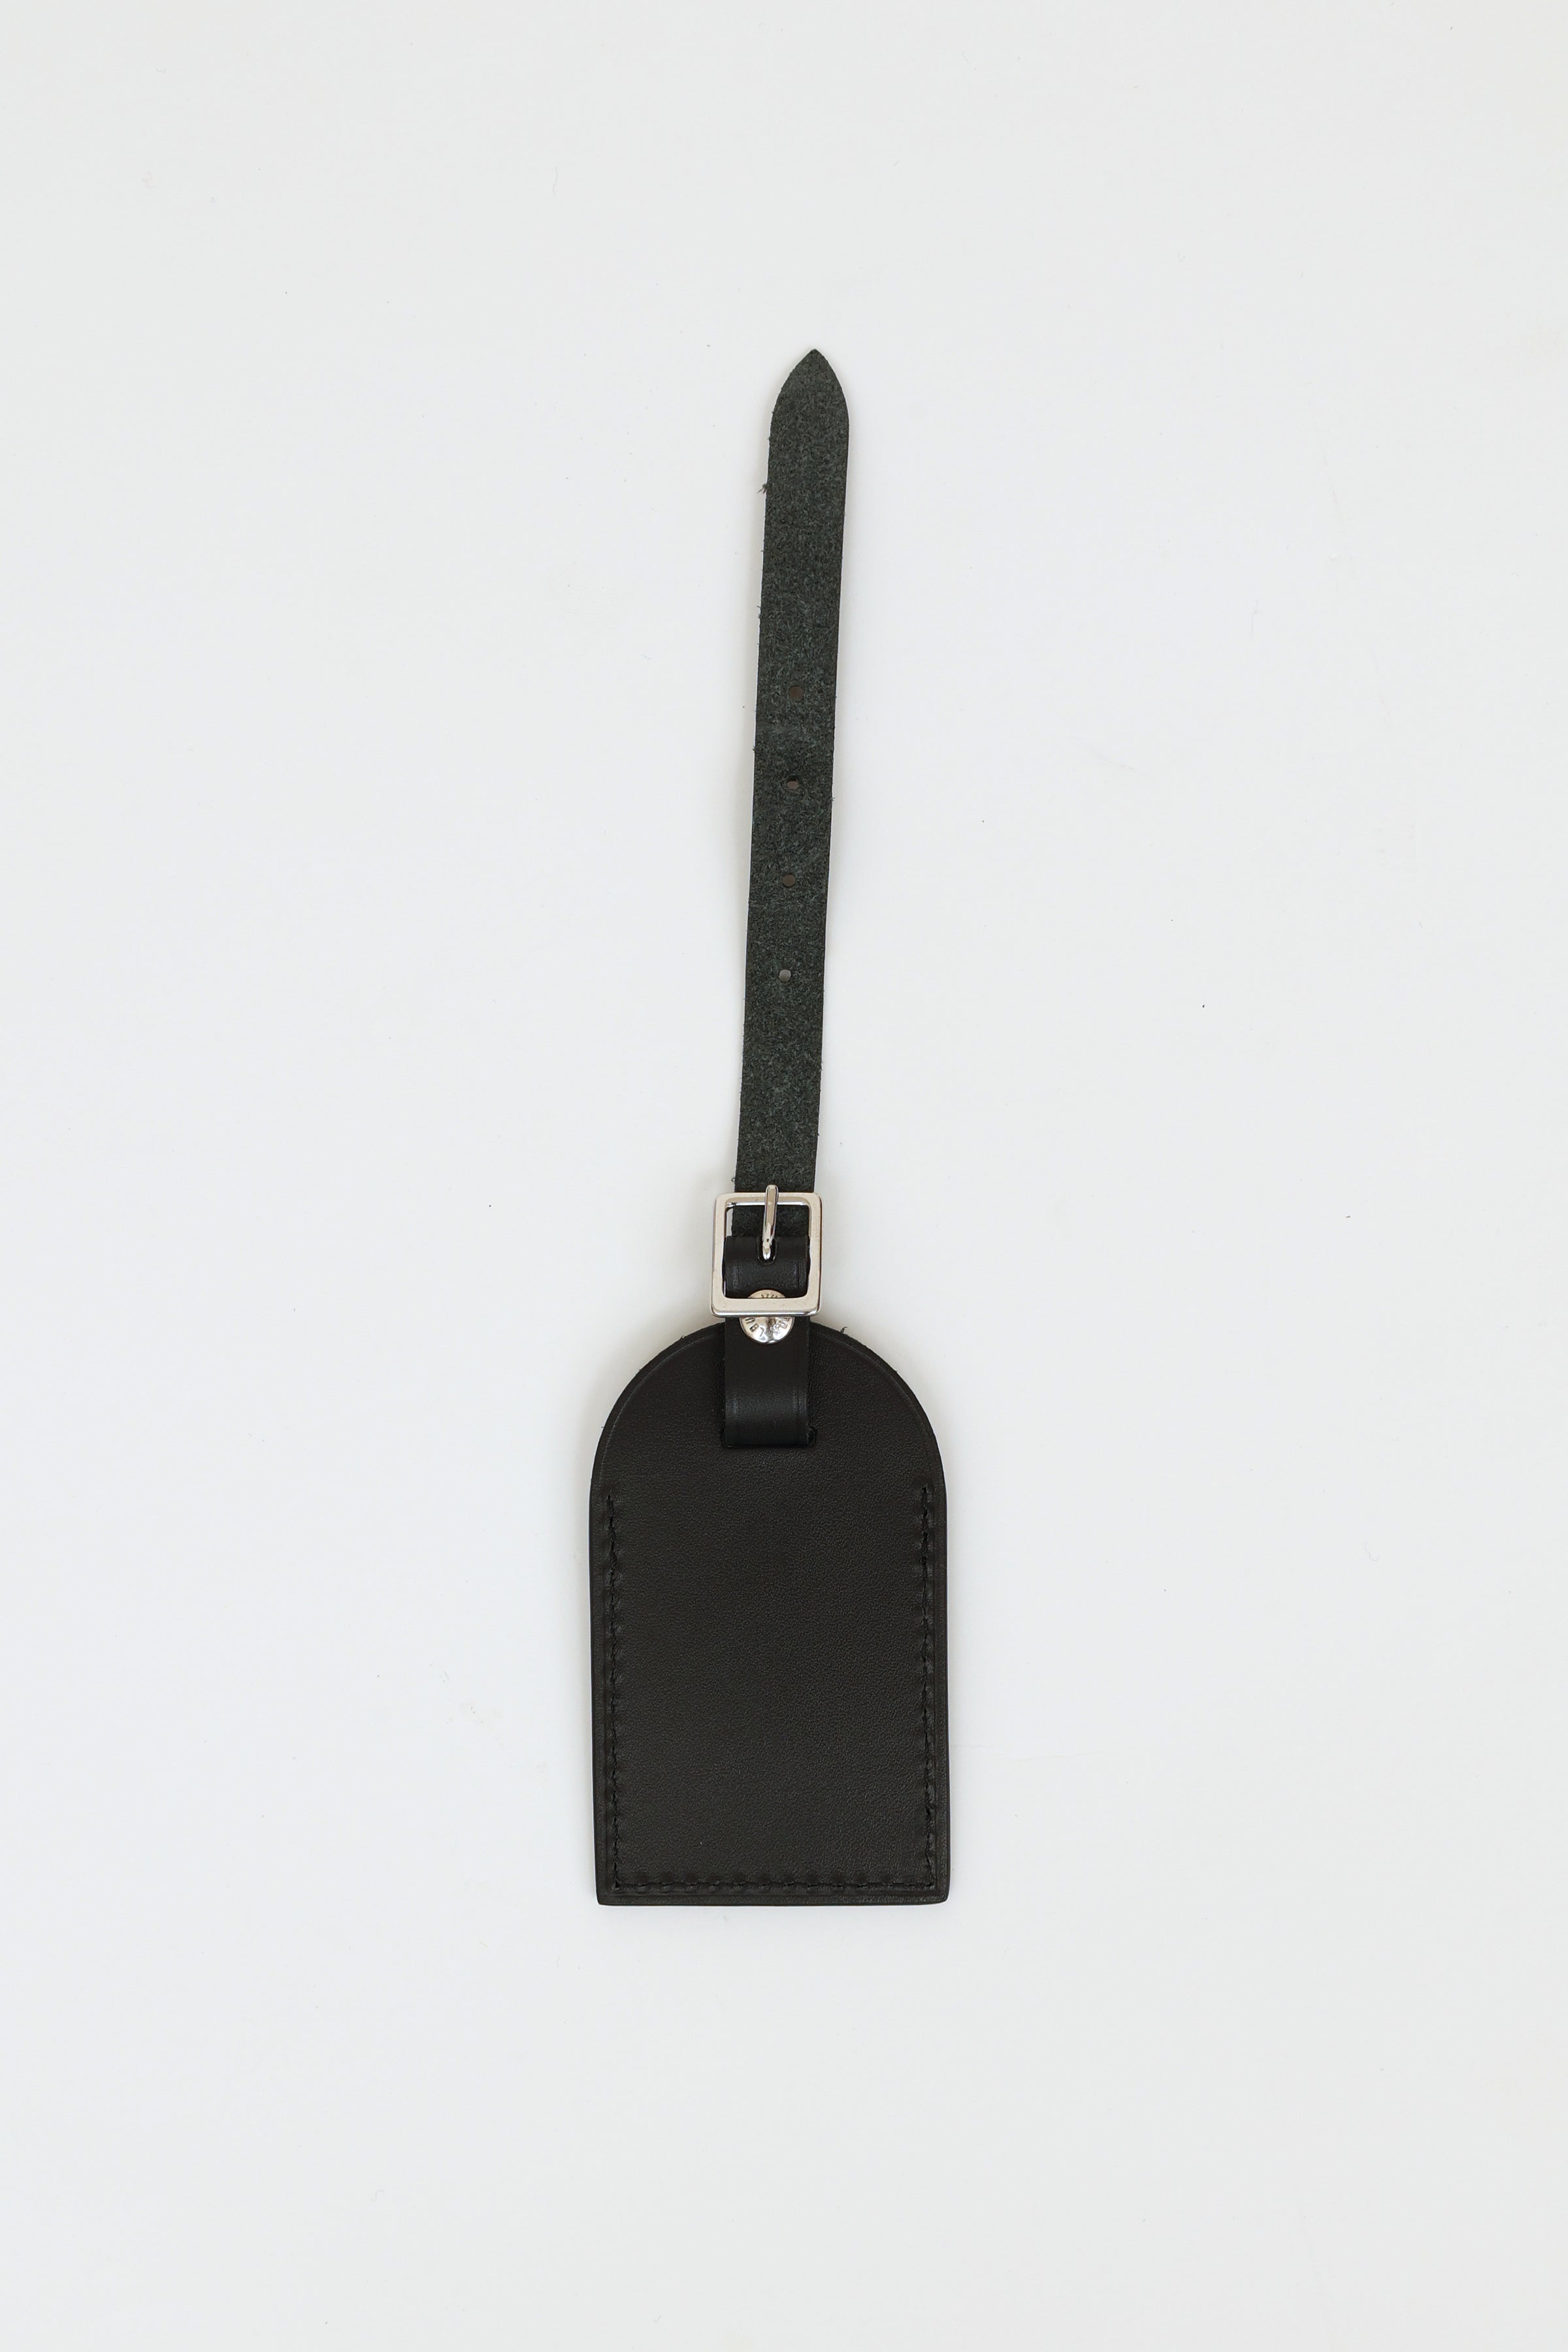 Louis Vuitton Fragment Luggage Tag Leather Black For Sale at 1stDibs  louis  vuitton luggage tag, louis vuitton black luggage tag, lv luggage tag